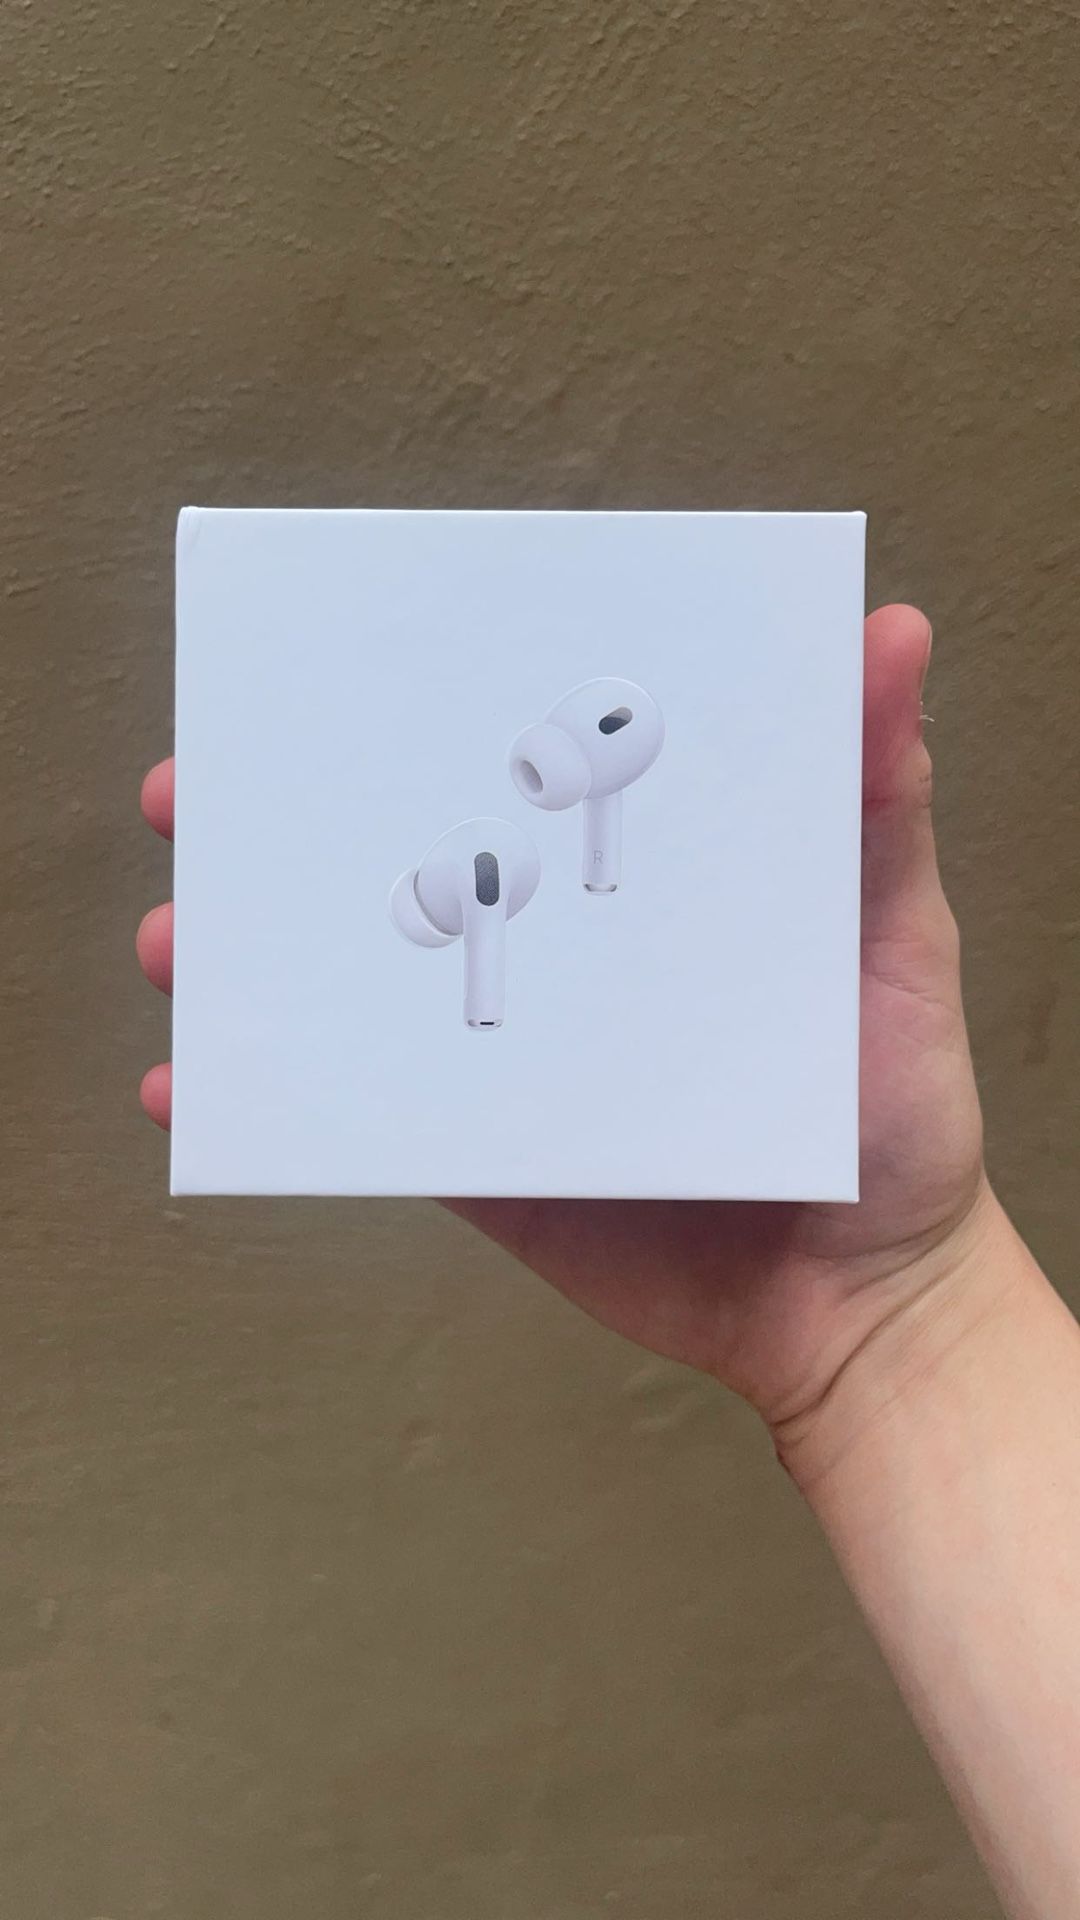 AirPods Pro 2nd Generation With MagSafe Charging Case (PICK UP ONLY) 